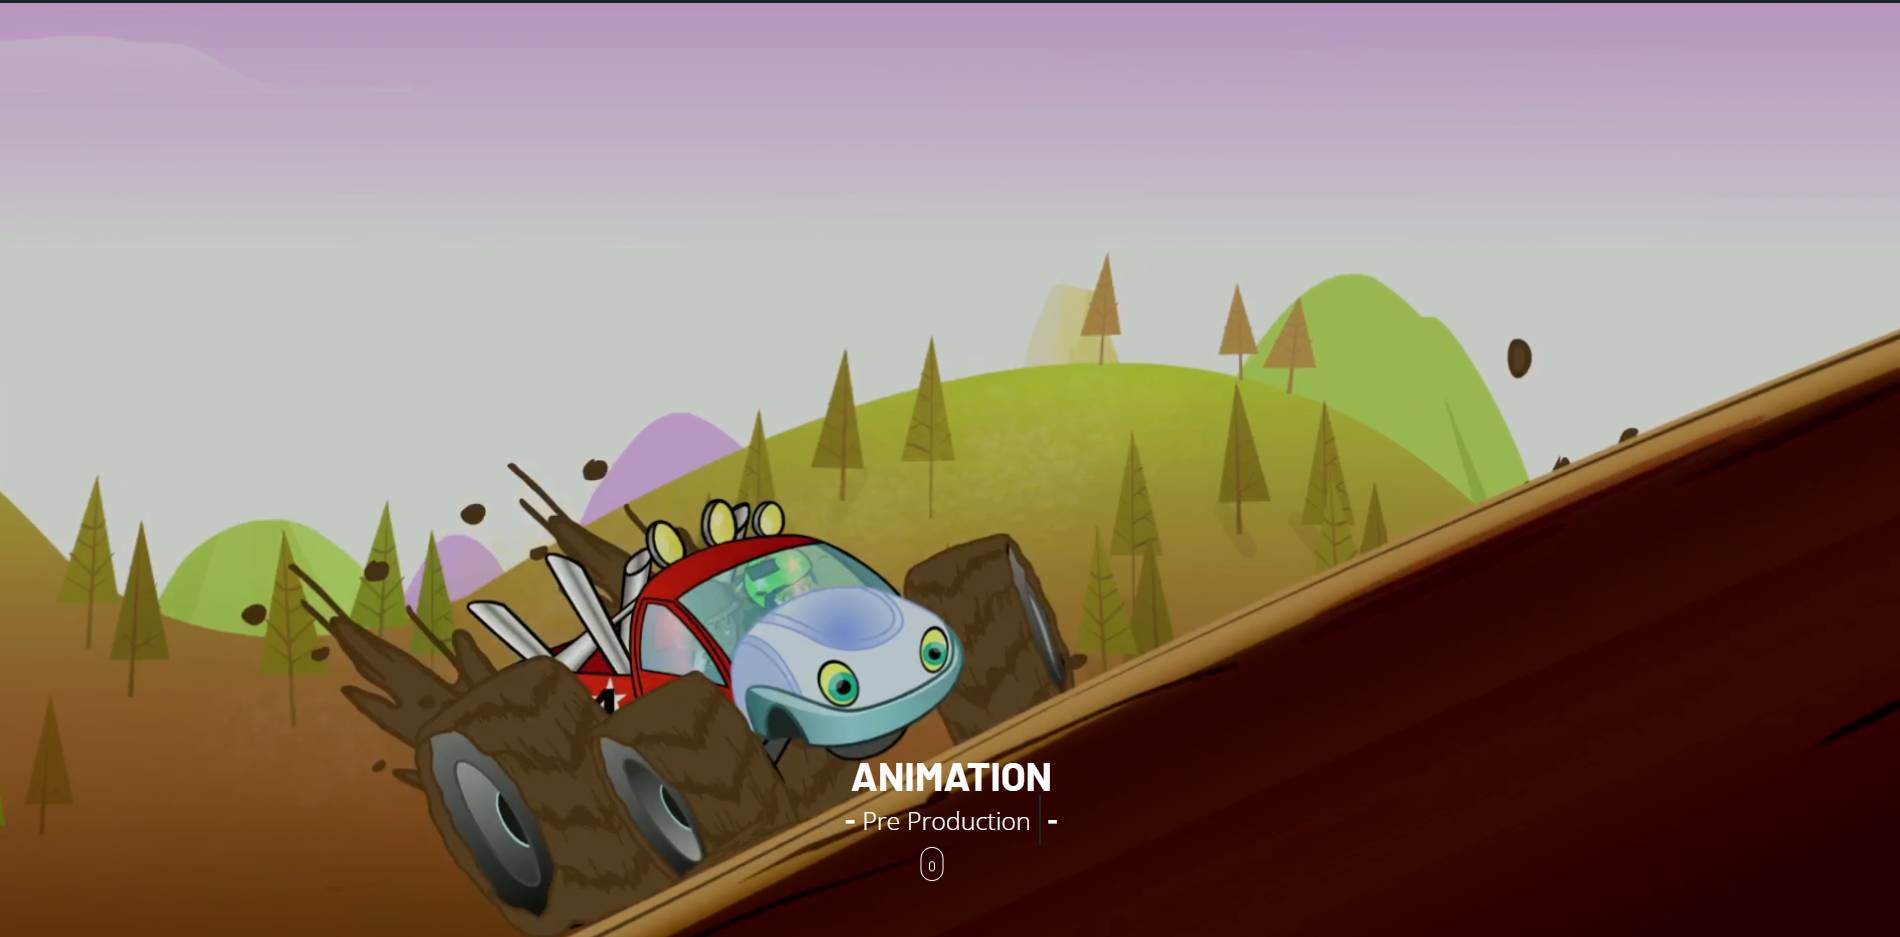 Top Animation studio in India | Top Animation Production House - Toonz  Media Group